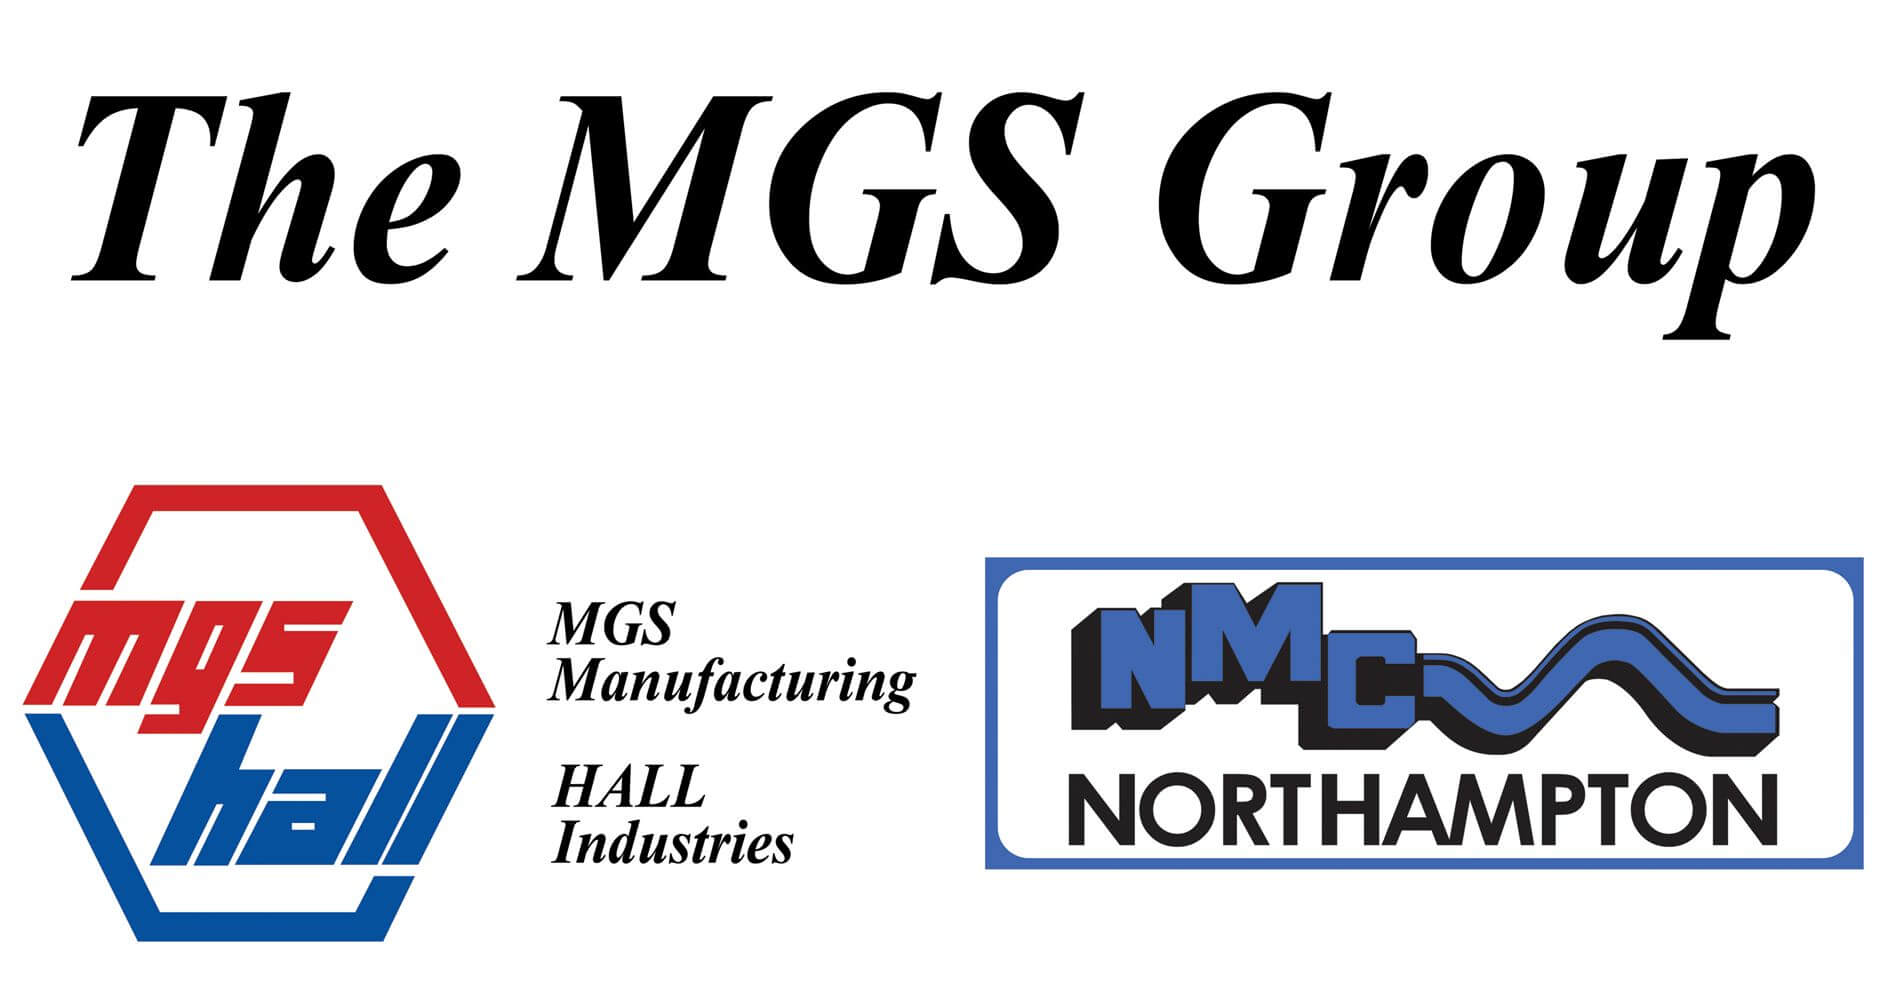 The MGS Group Logo half size